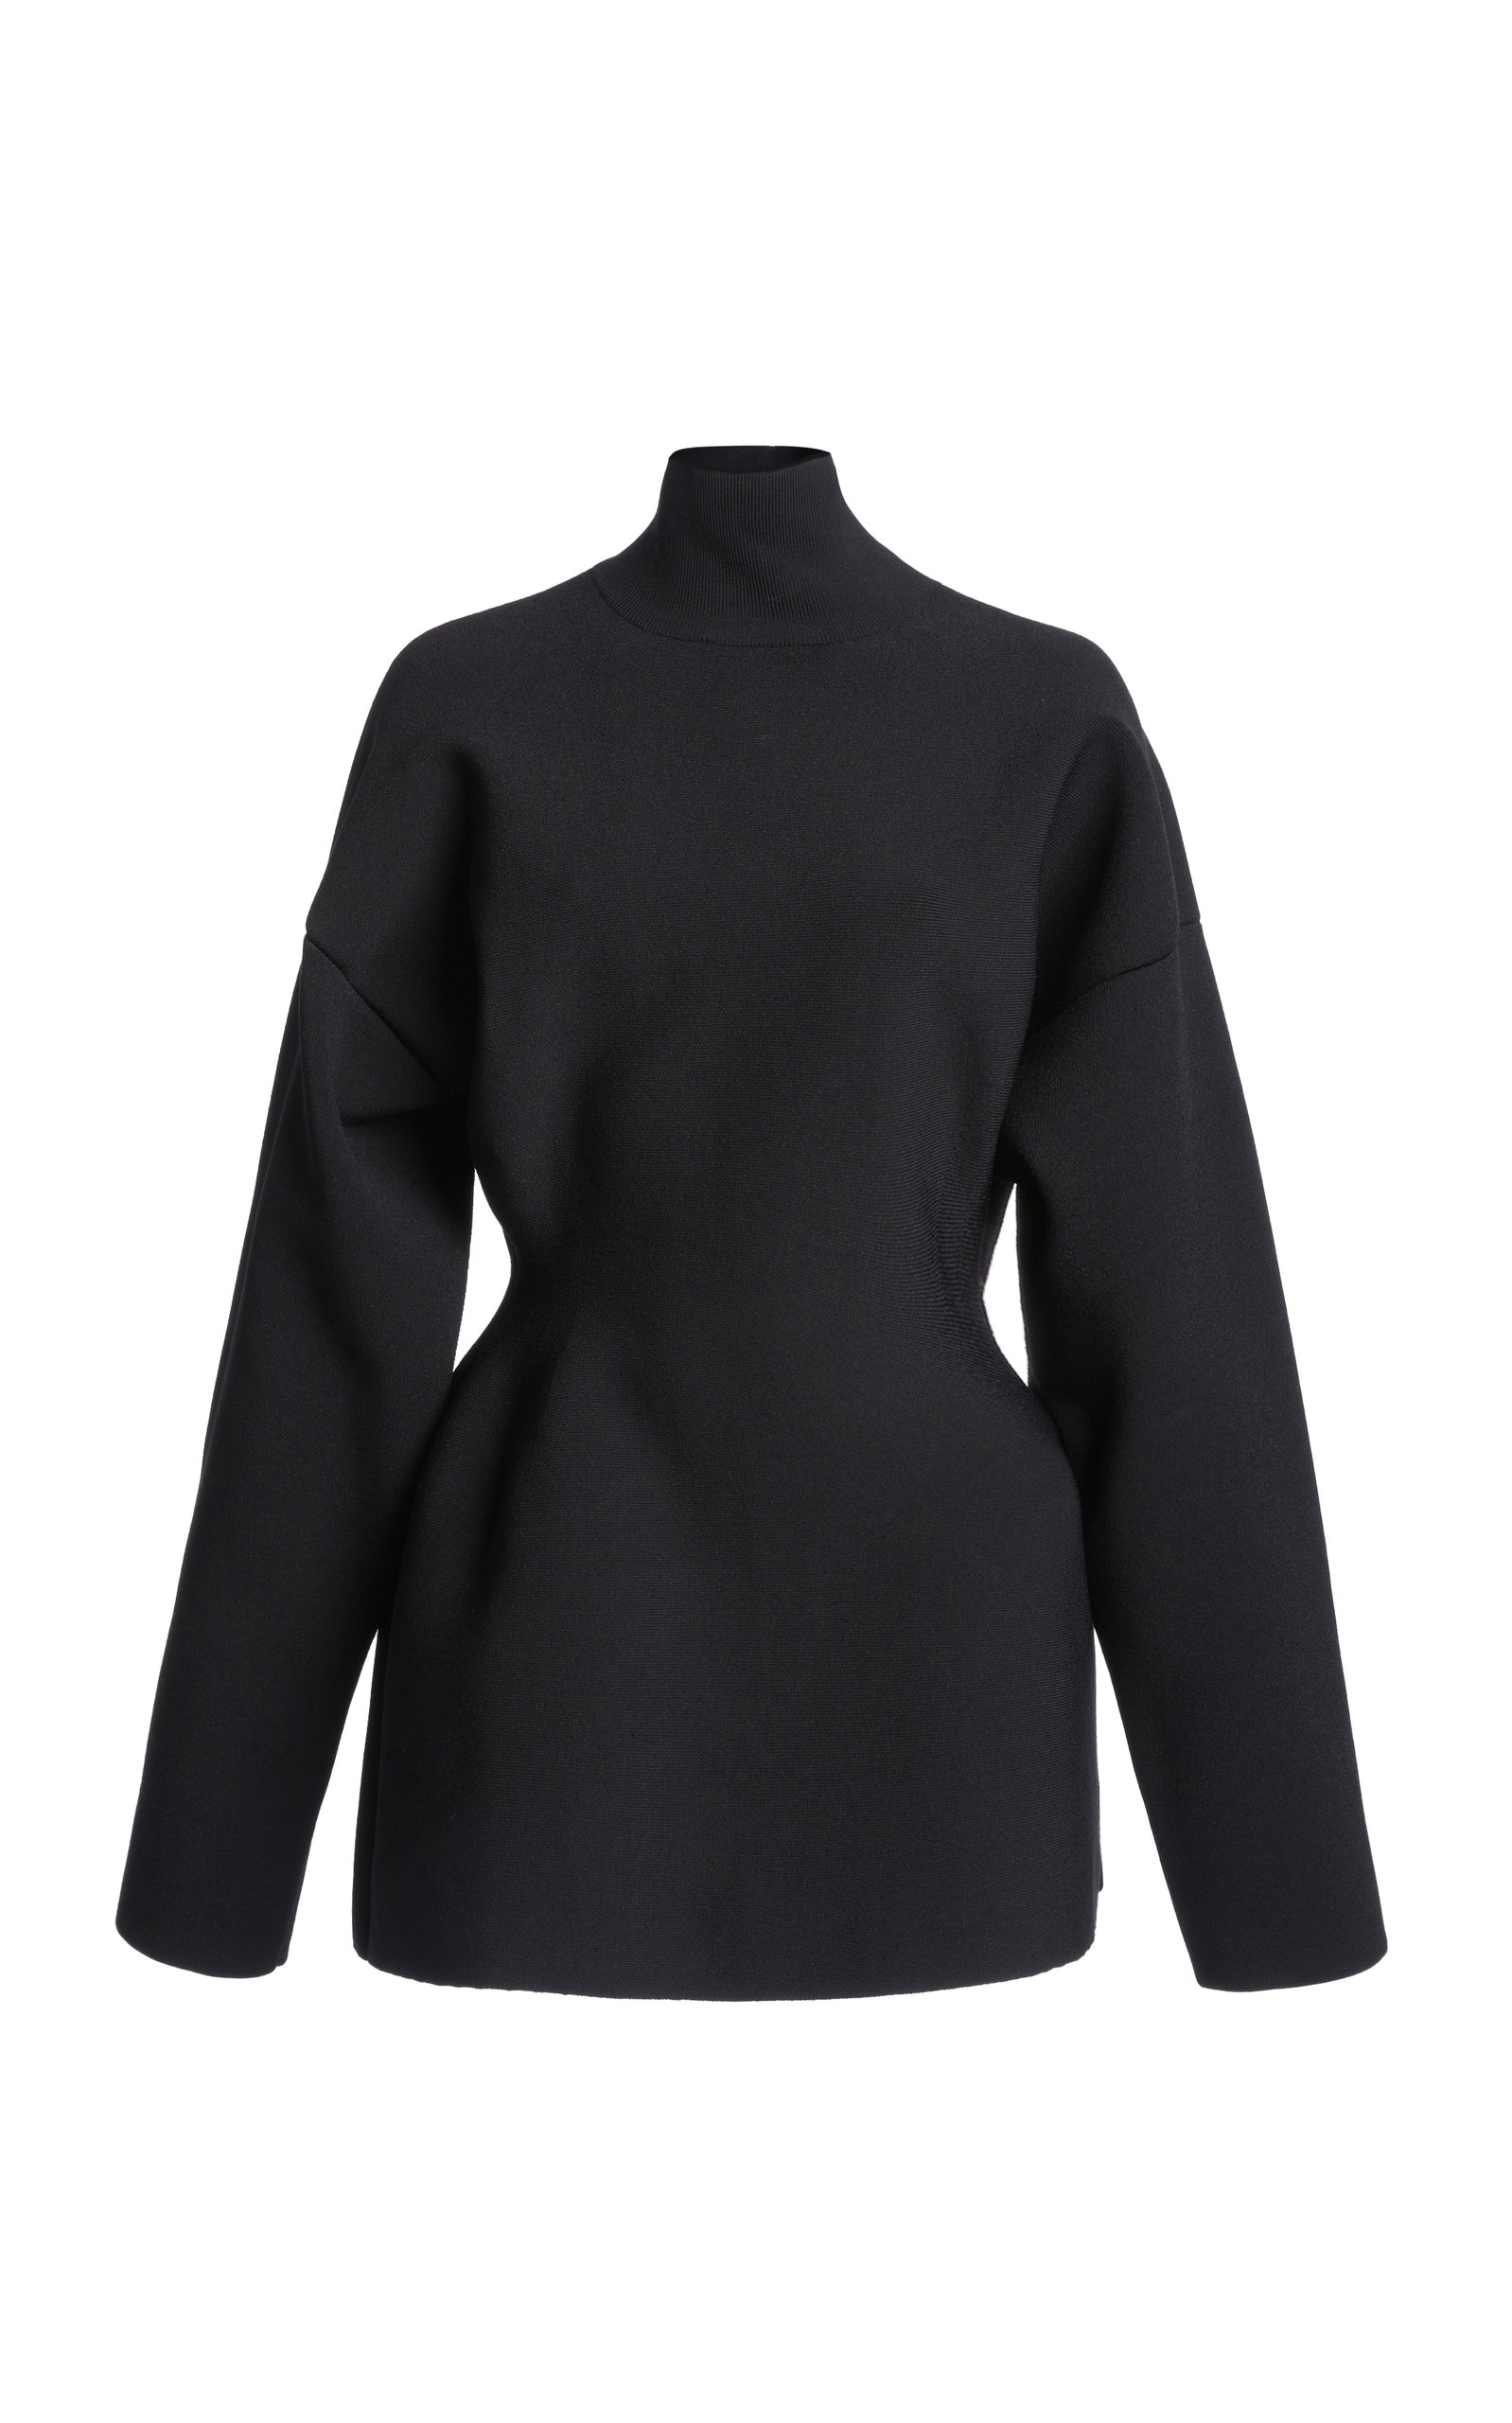 Compact-Knit Hourglass Turtleneck Top